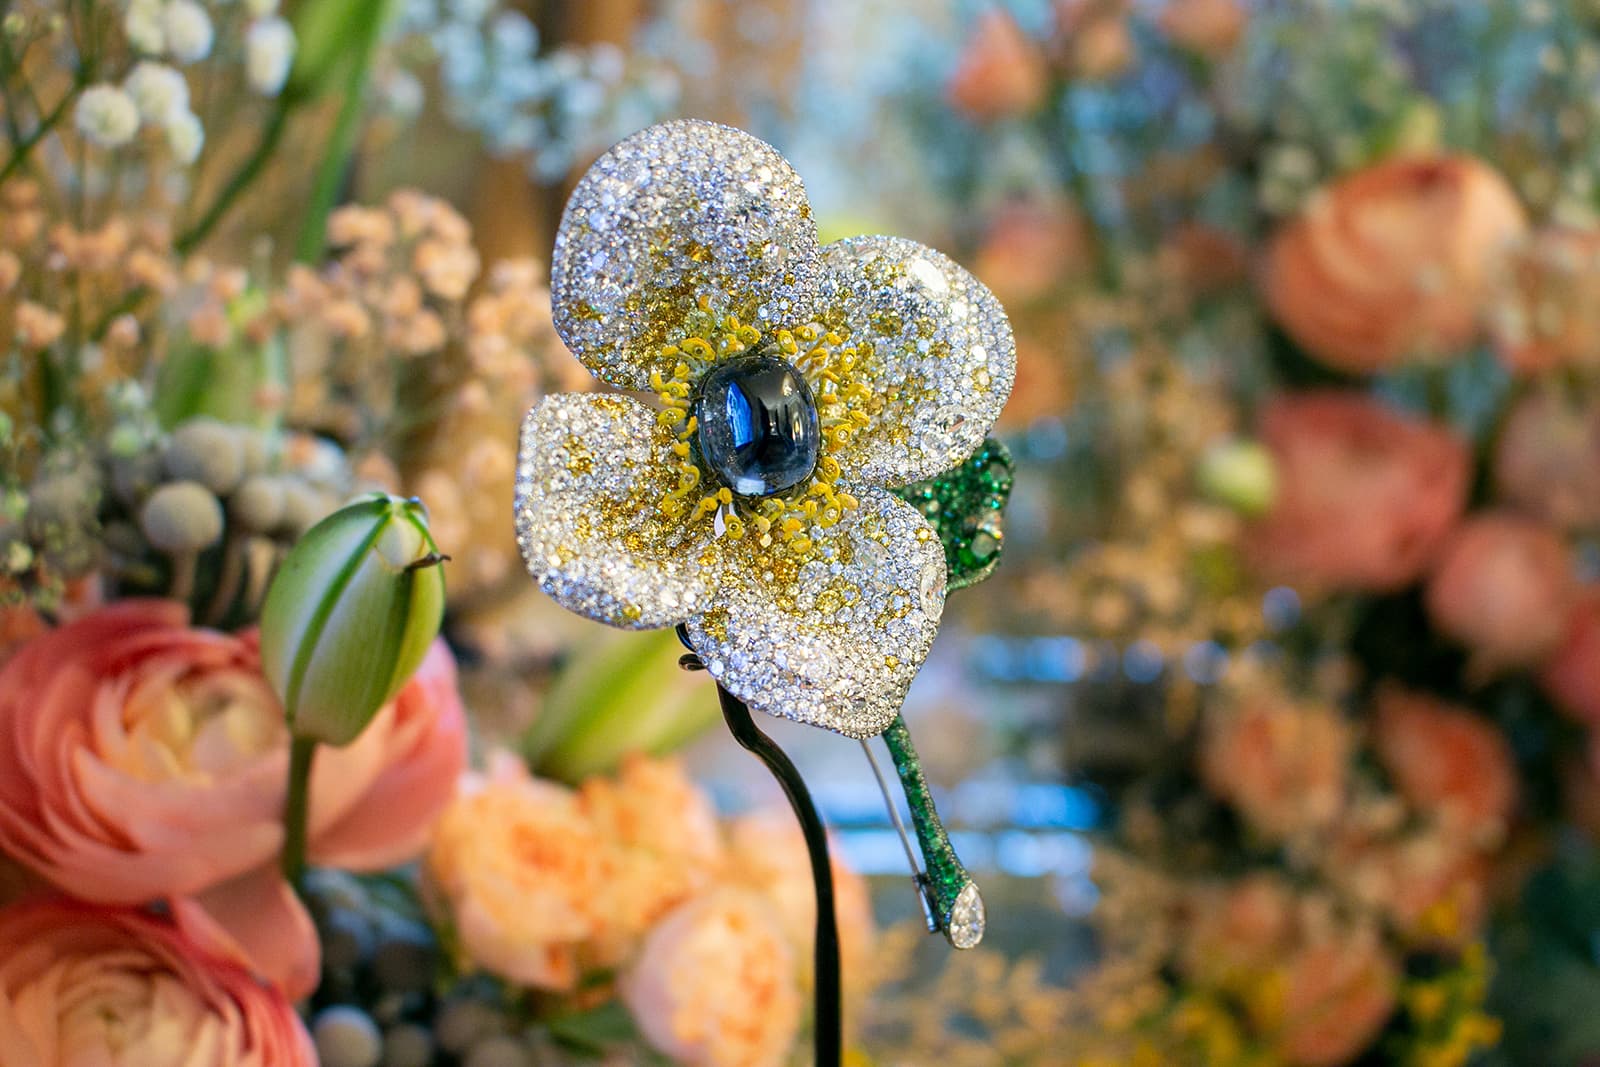 Cindy Chao Sapphire Floral brooch with a 32.11 carat untreated Burmese sapphire, colourless and yellow diamonds, demantoids and tsavorites